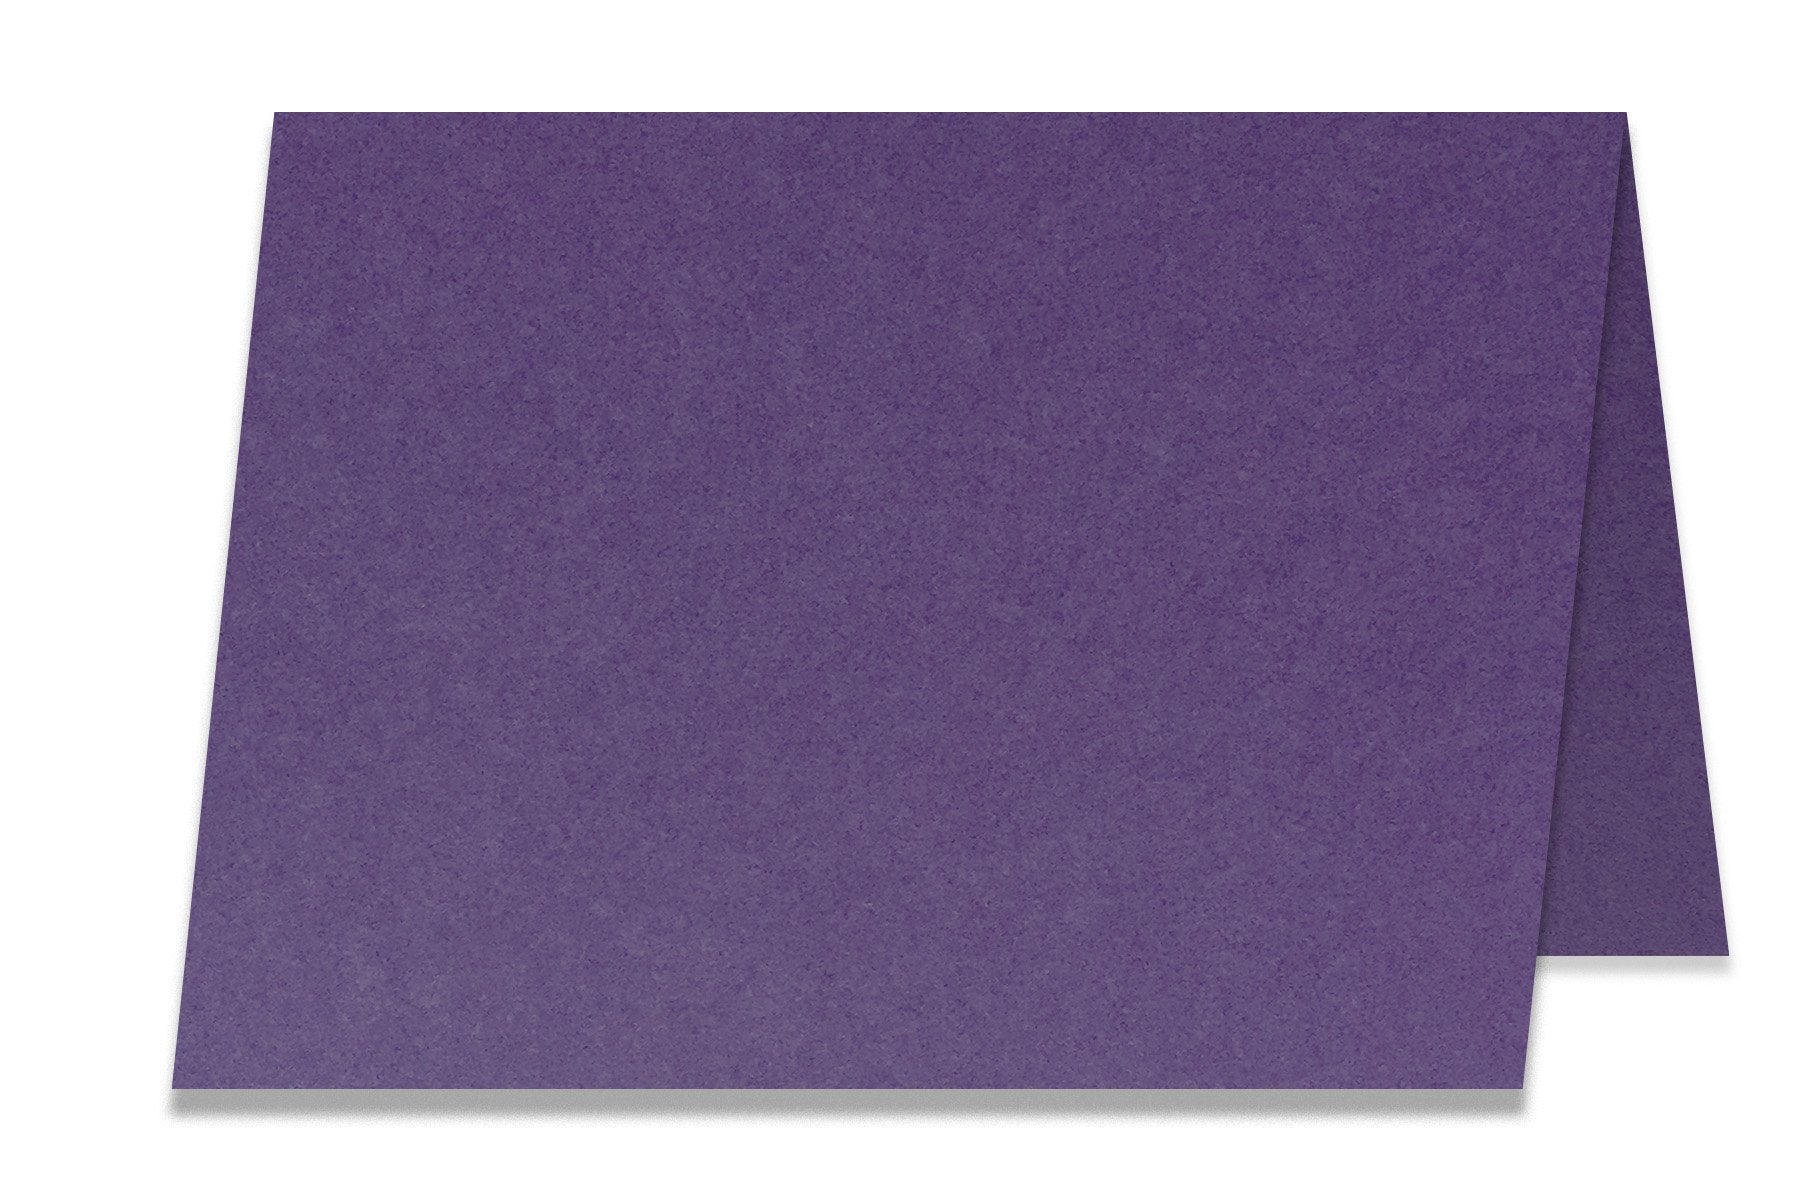 Blank A1 Folded note cards for DIY party invites and thank you cards -  CutCardStock